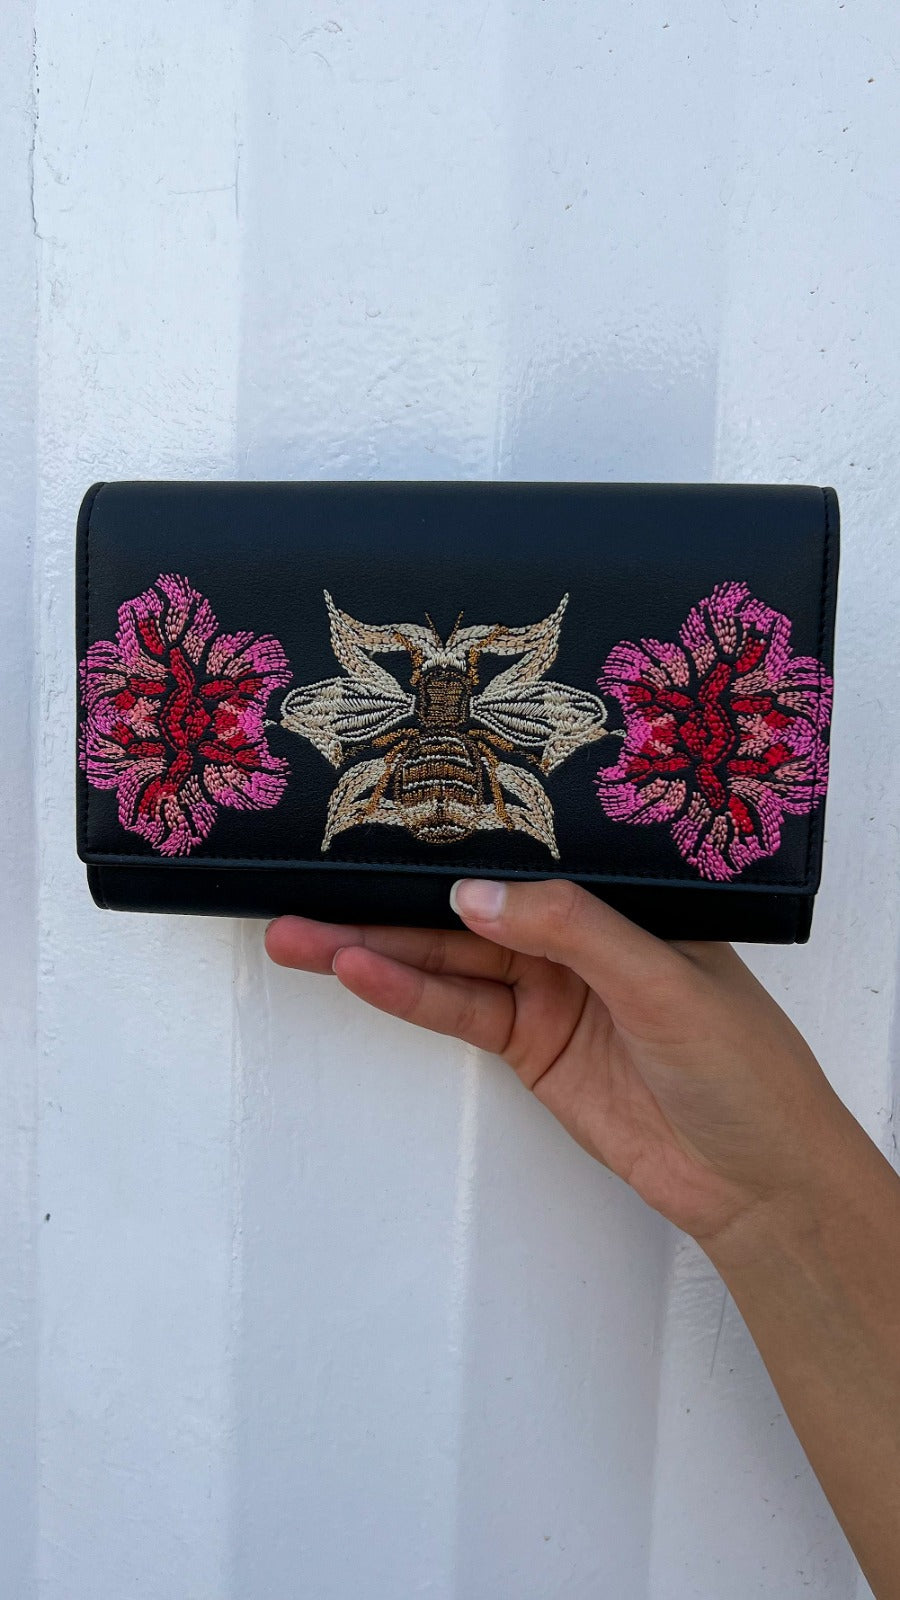 The Floral Bumblebee Wallet